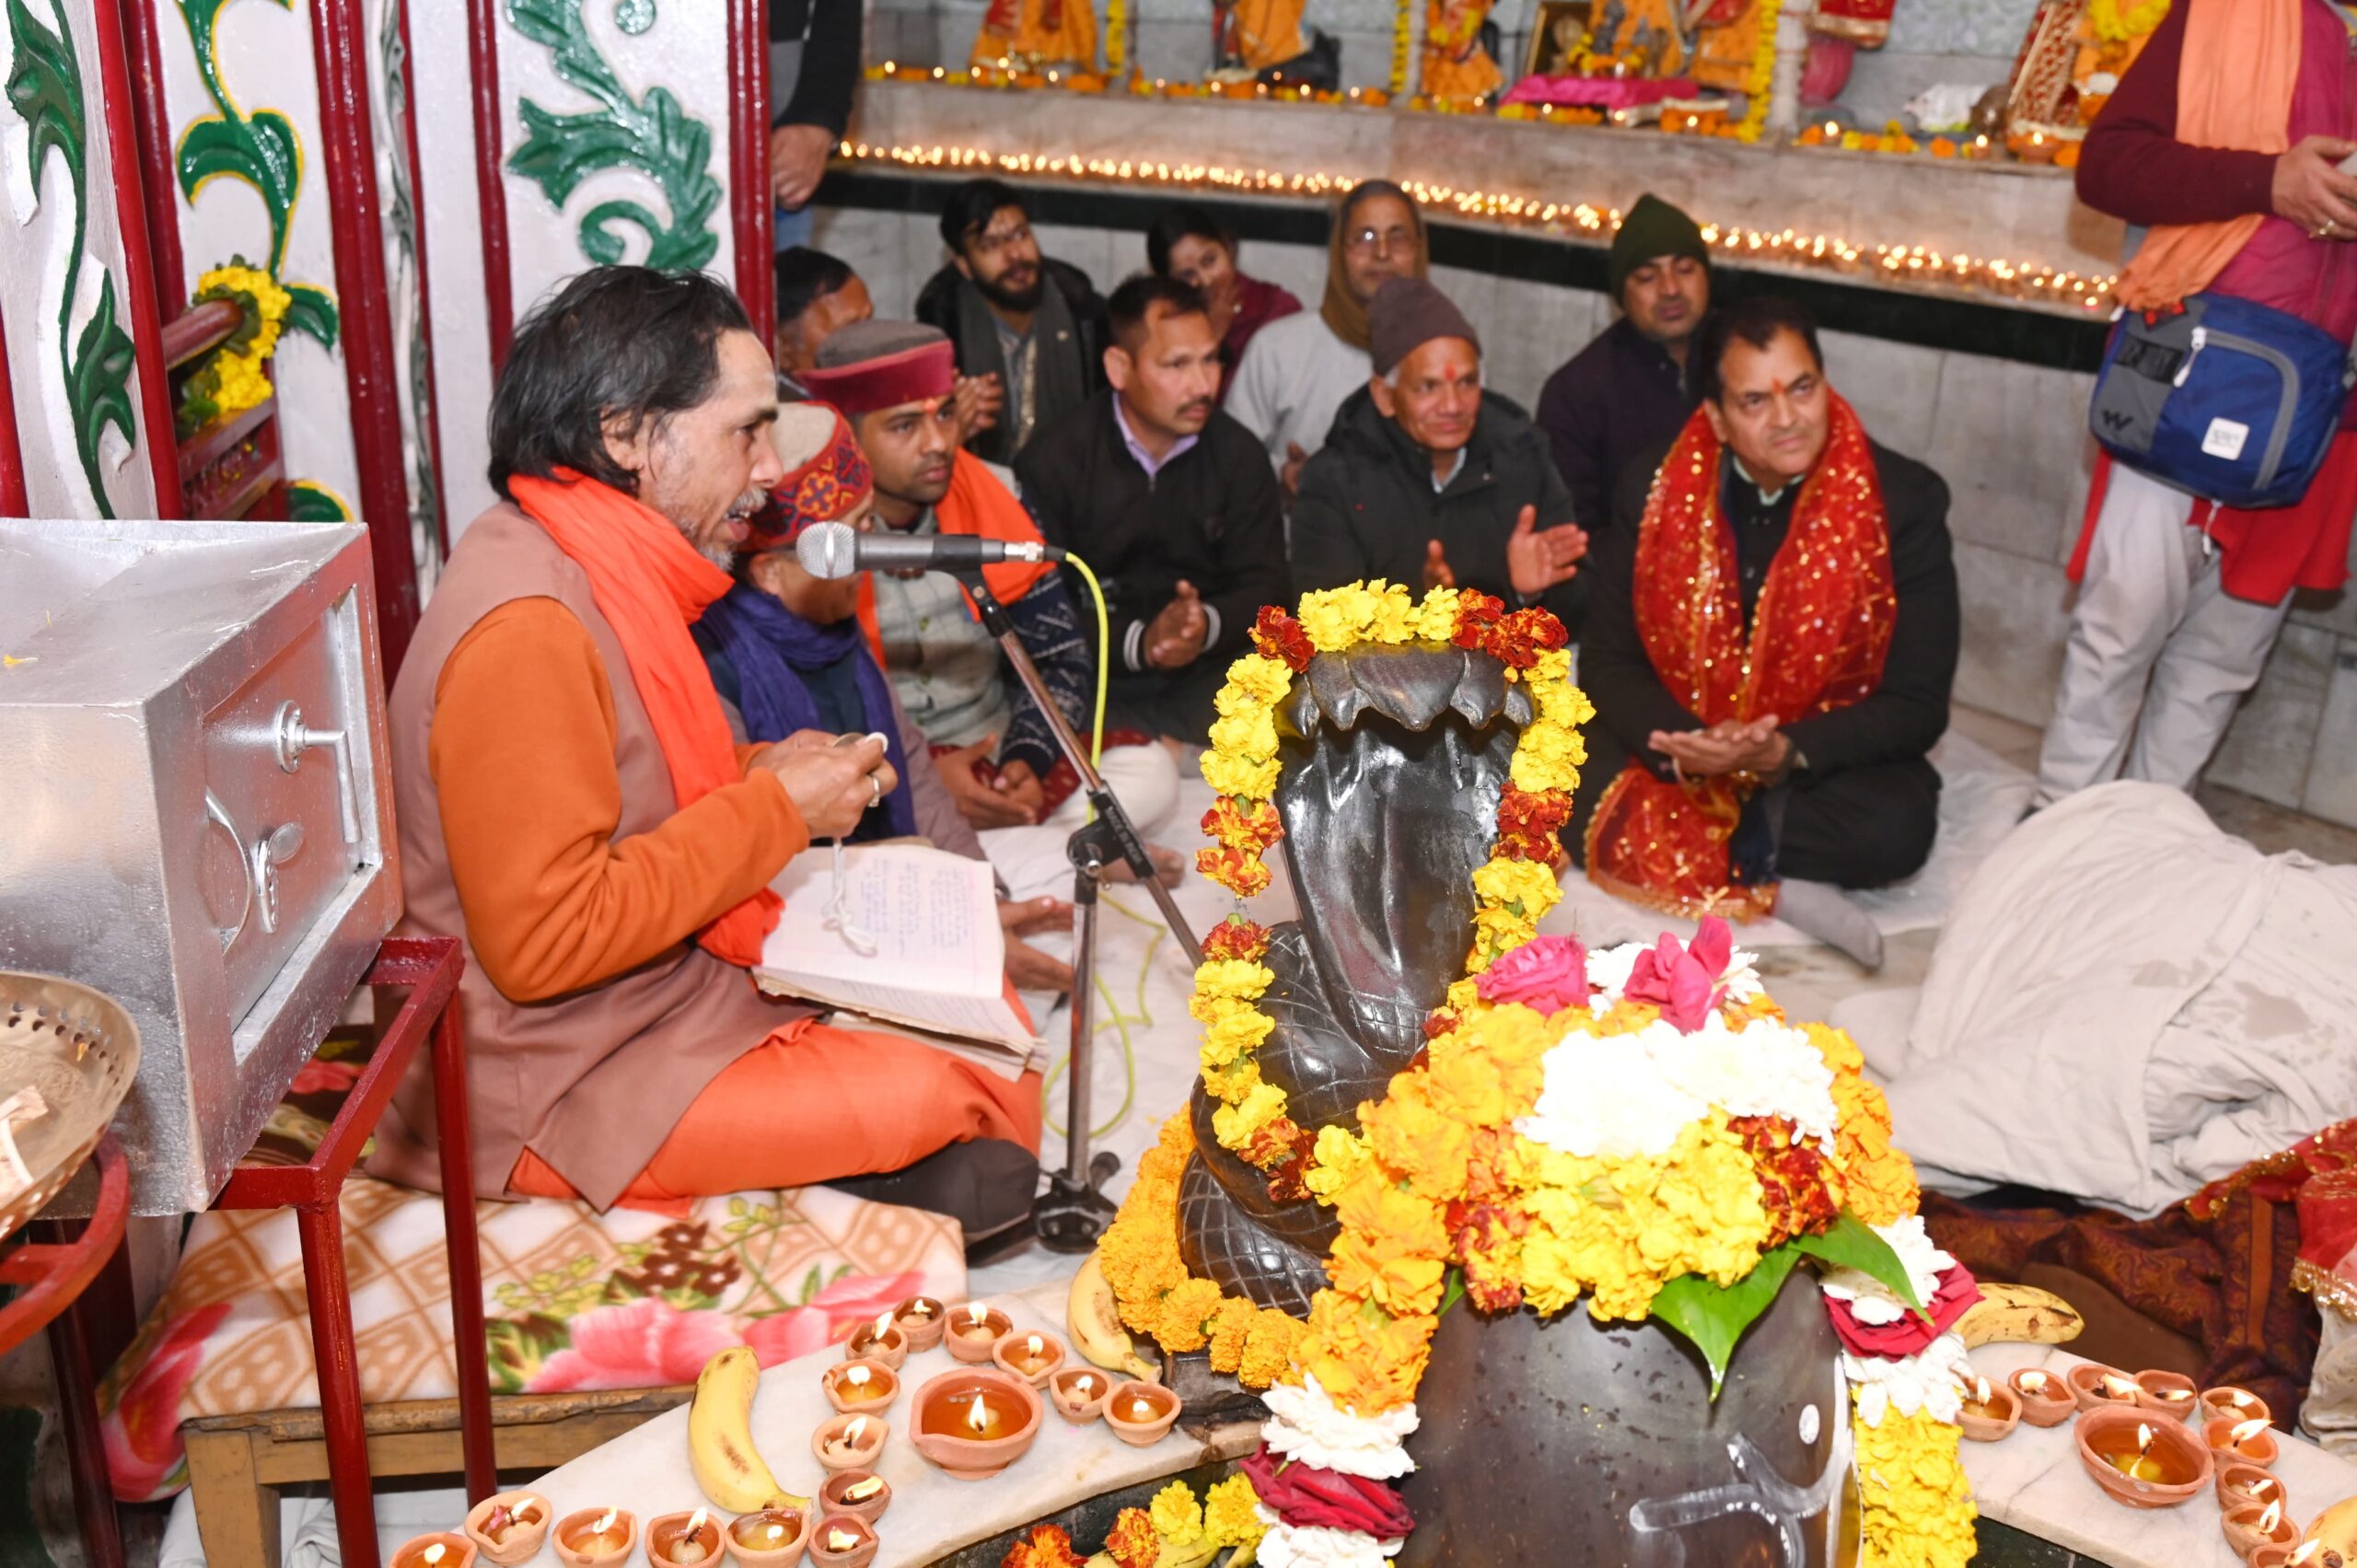 ﻿ On the occasion of the 26th foundation day of Shri Santoshi Mata Temple located at Tapkeshwar Mahadev, a grand program was organized in the mother's temple.